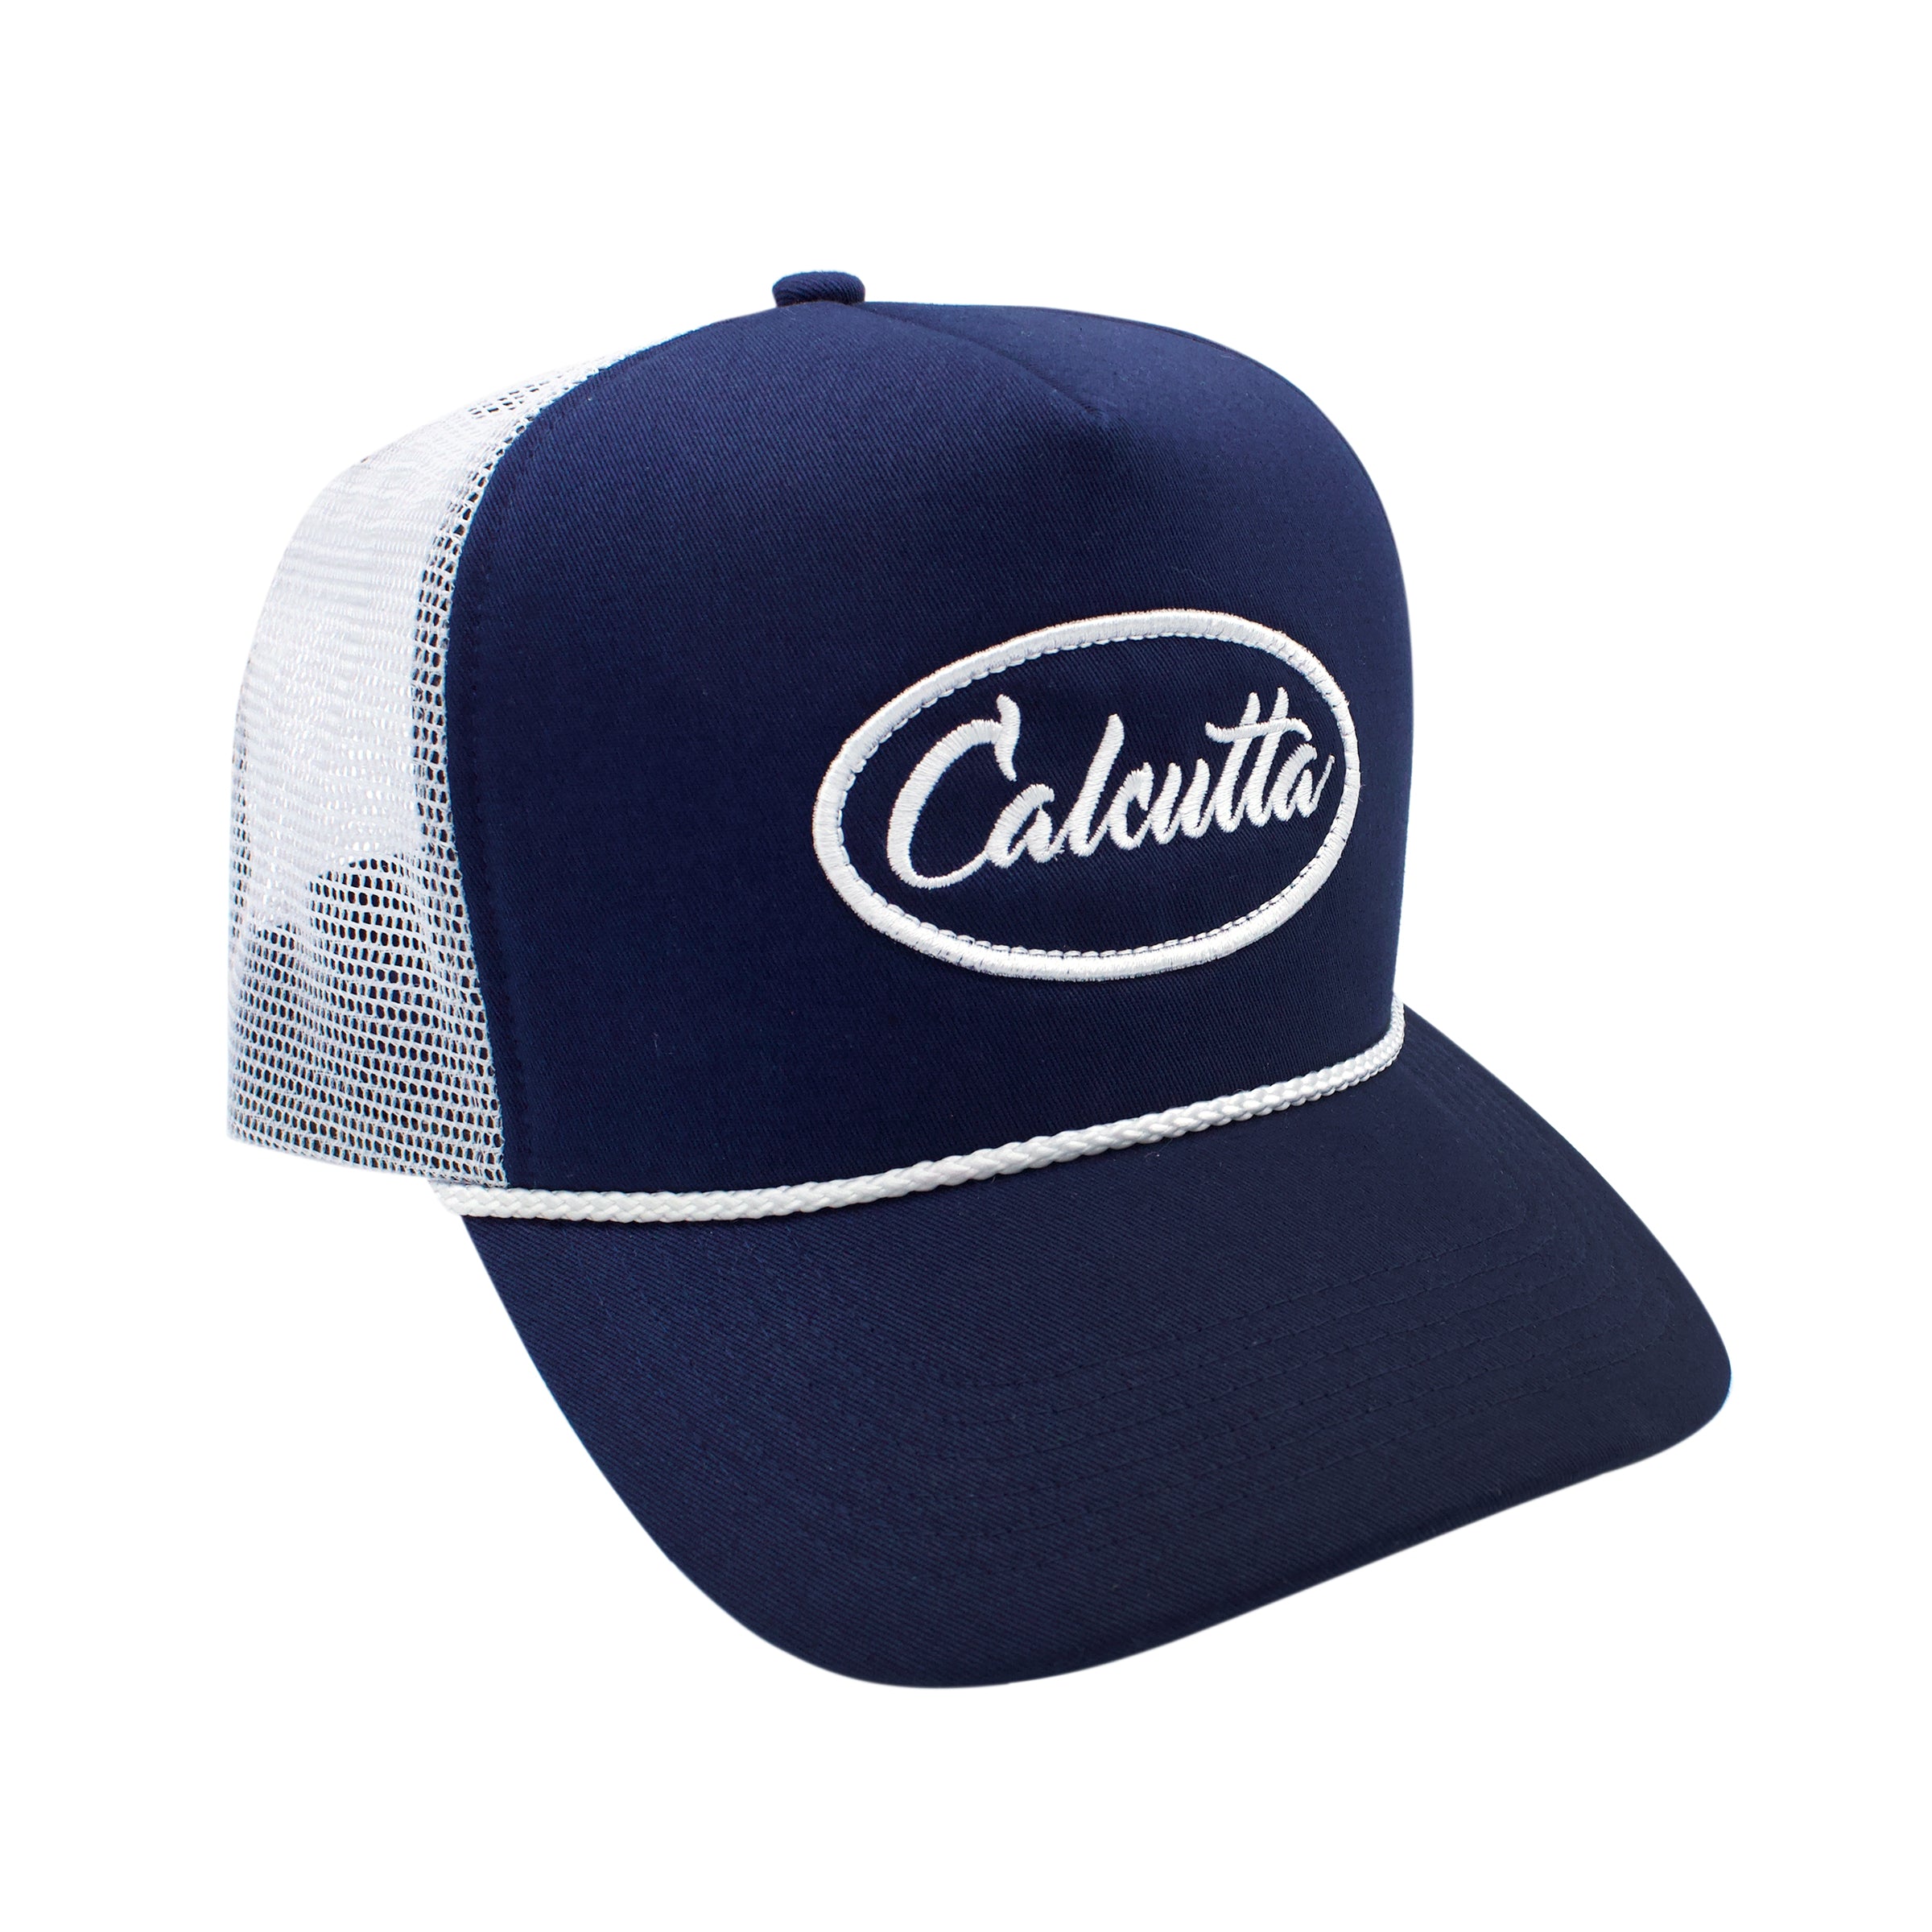 Classic Trucker Fishing Hat with Calcutta Patch navy